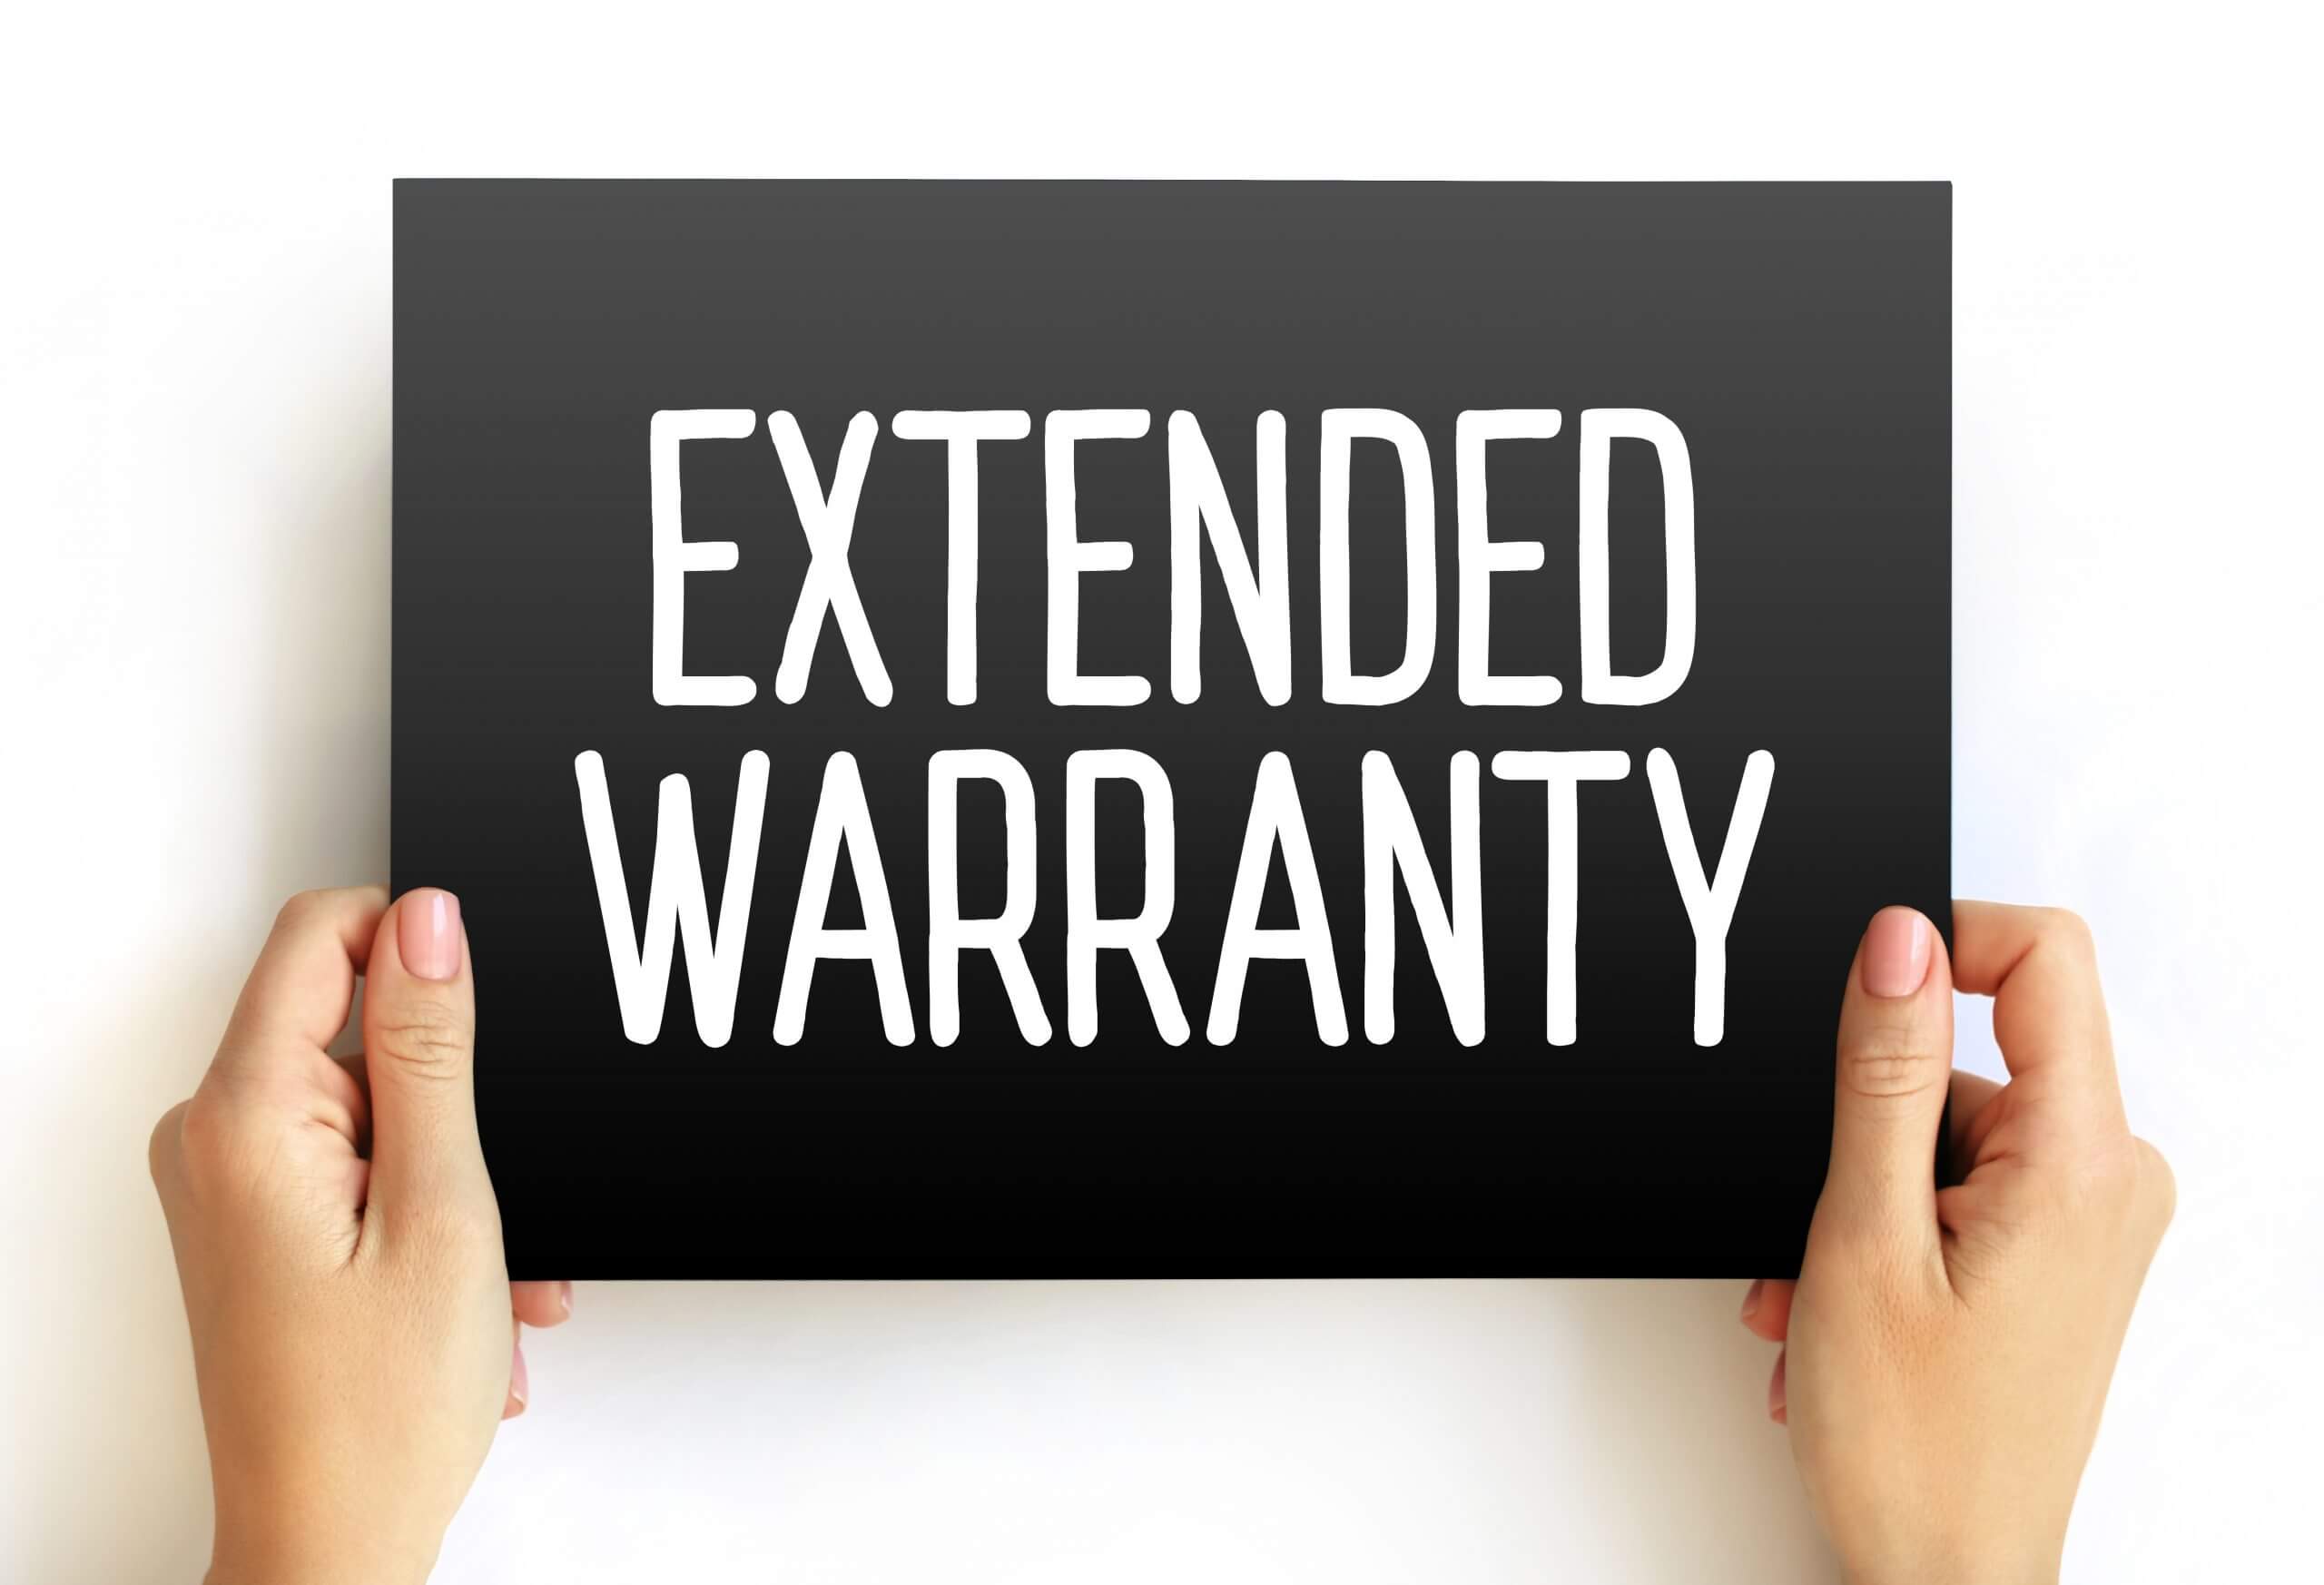 Extended Warranty - policies that extend the warranty period of consumer durable goods beyond what is offered by the manufacturer, text concept on card